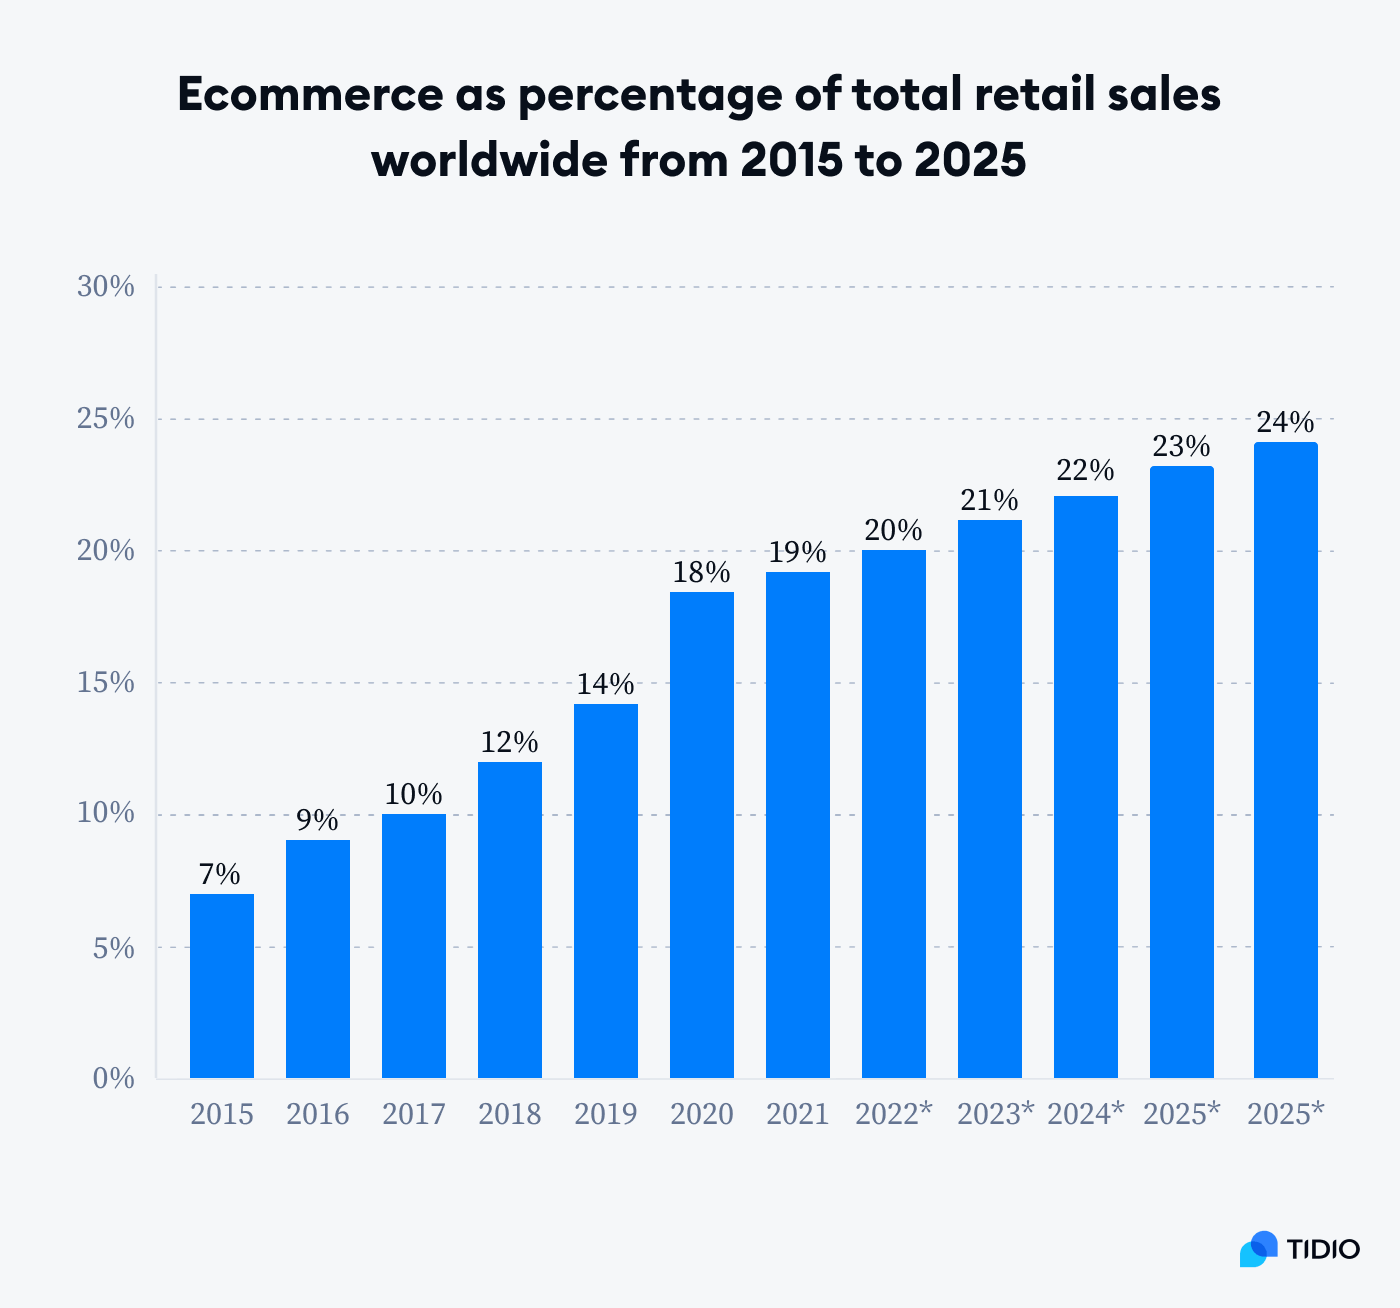 ecommerce as a percentage of total retaile sales worldwise  graphic